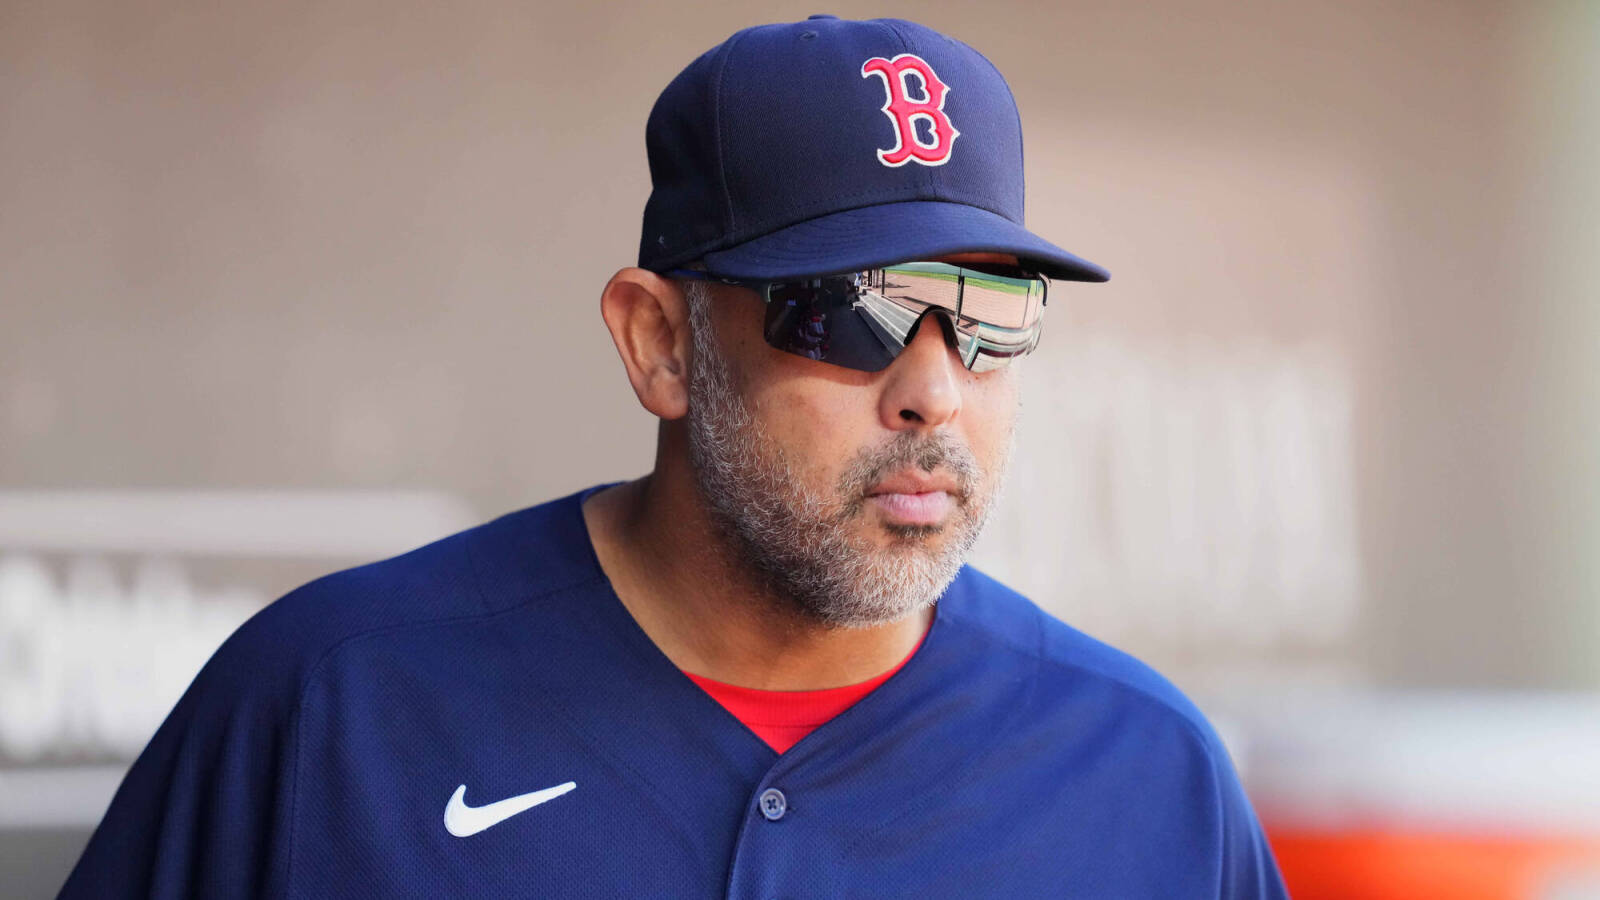 Red Sox manager Alex Cora doesn't want to follow in footsteps of Terry Francona